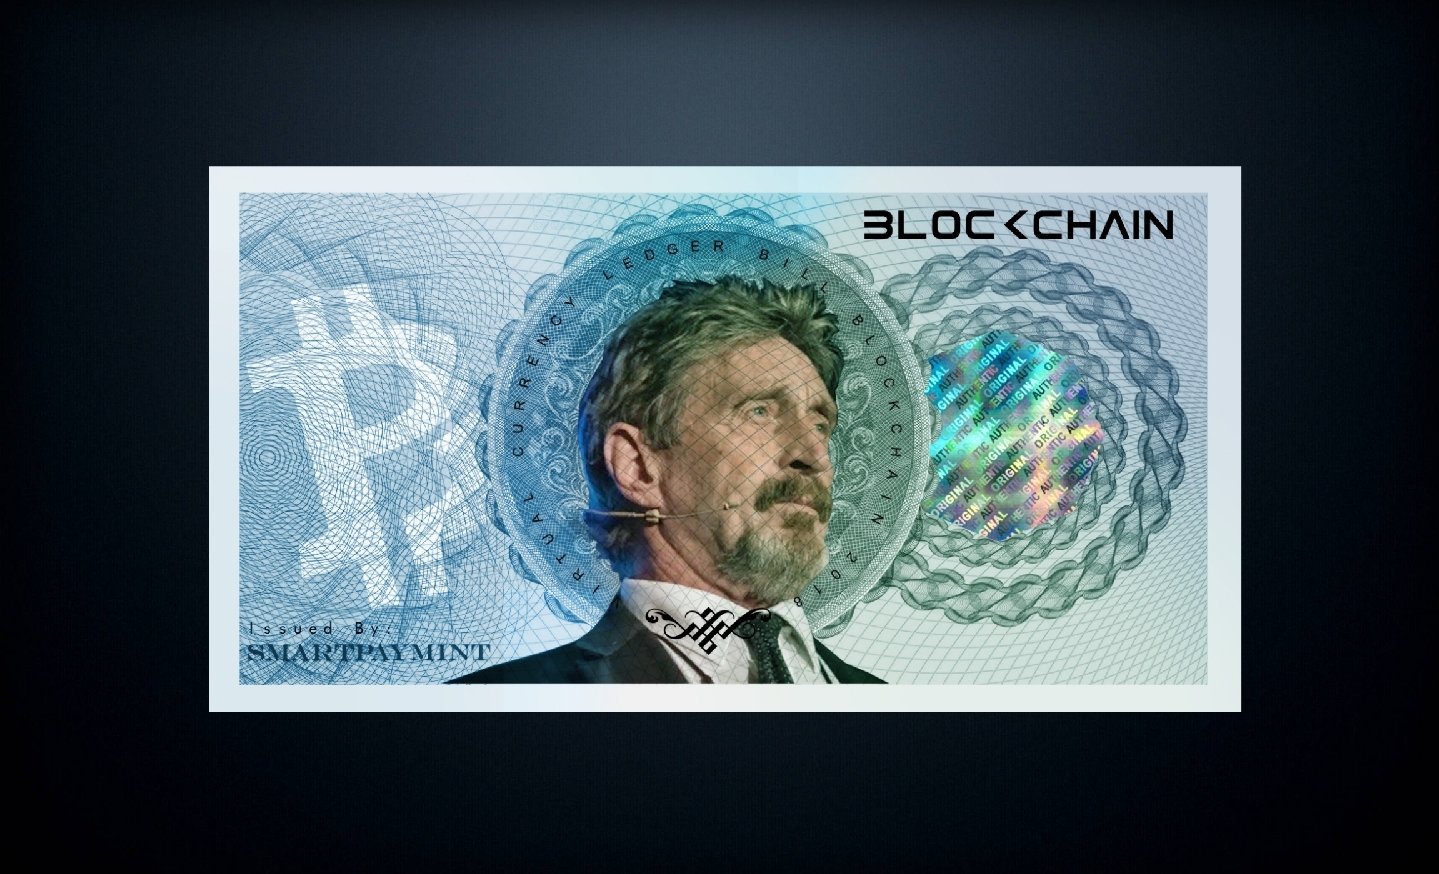 McAfee Redemption Unit (MRU): The Crypto-Backed FIAT Proposed by John Mcafee 10